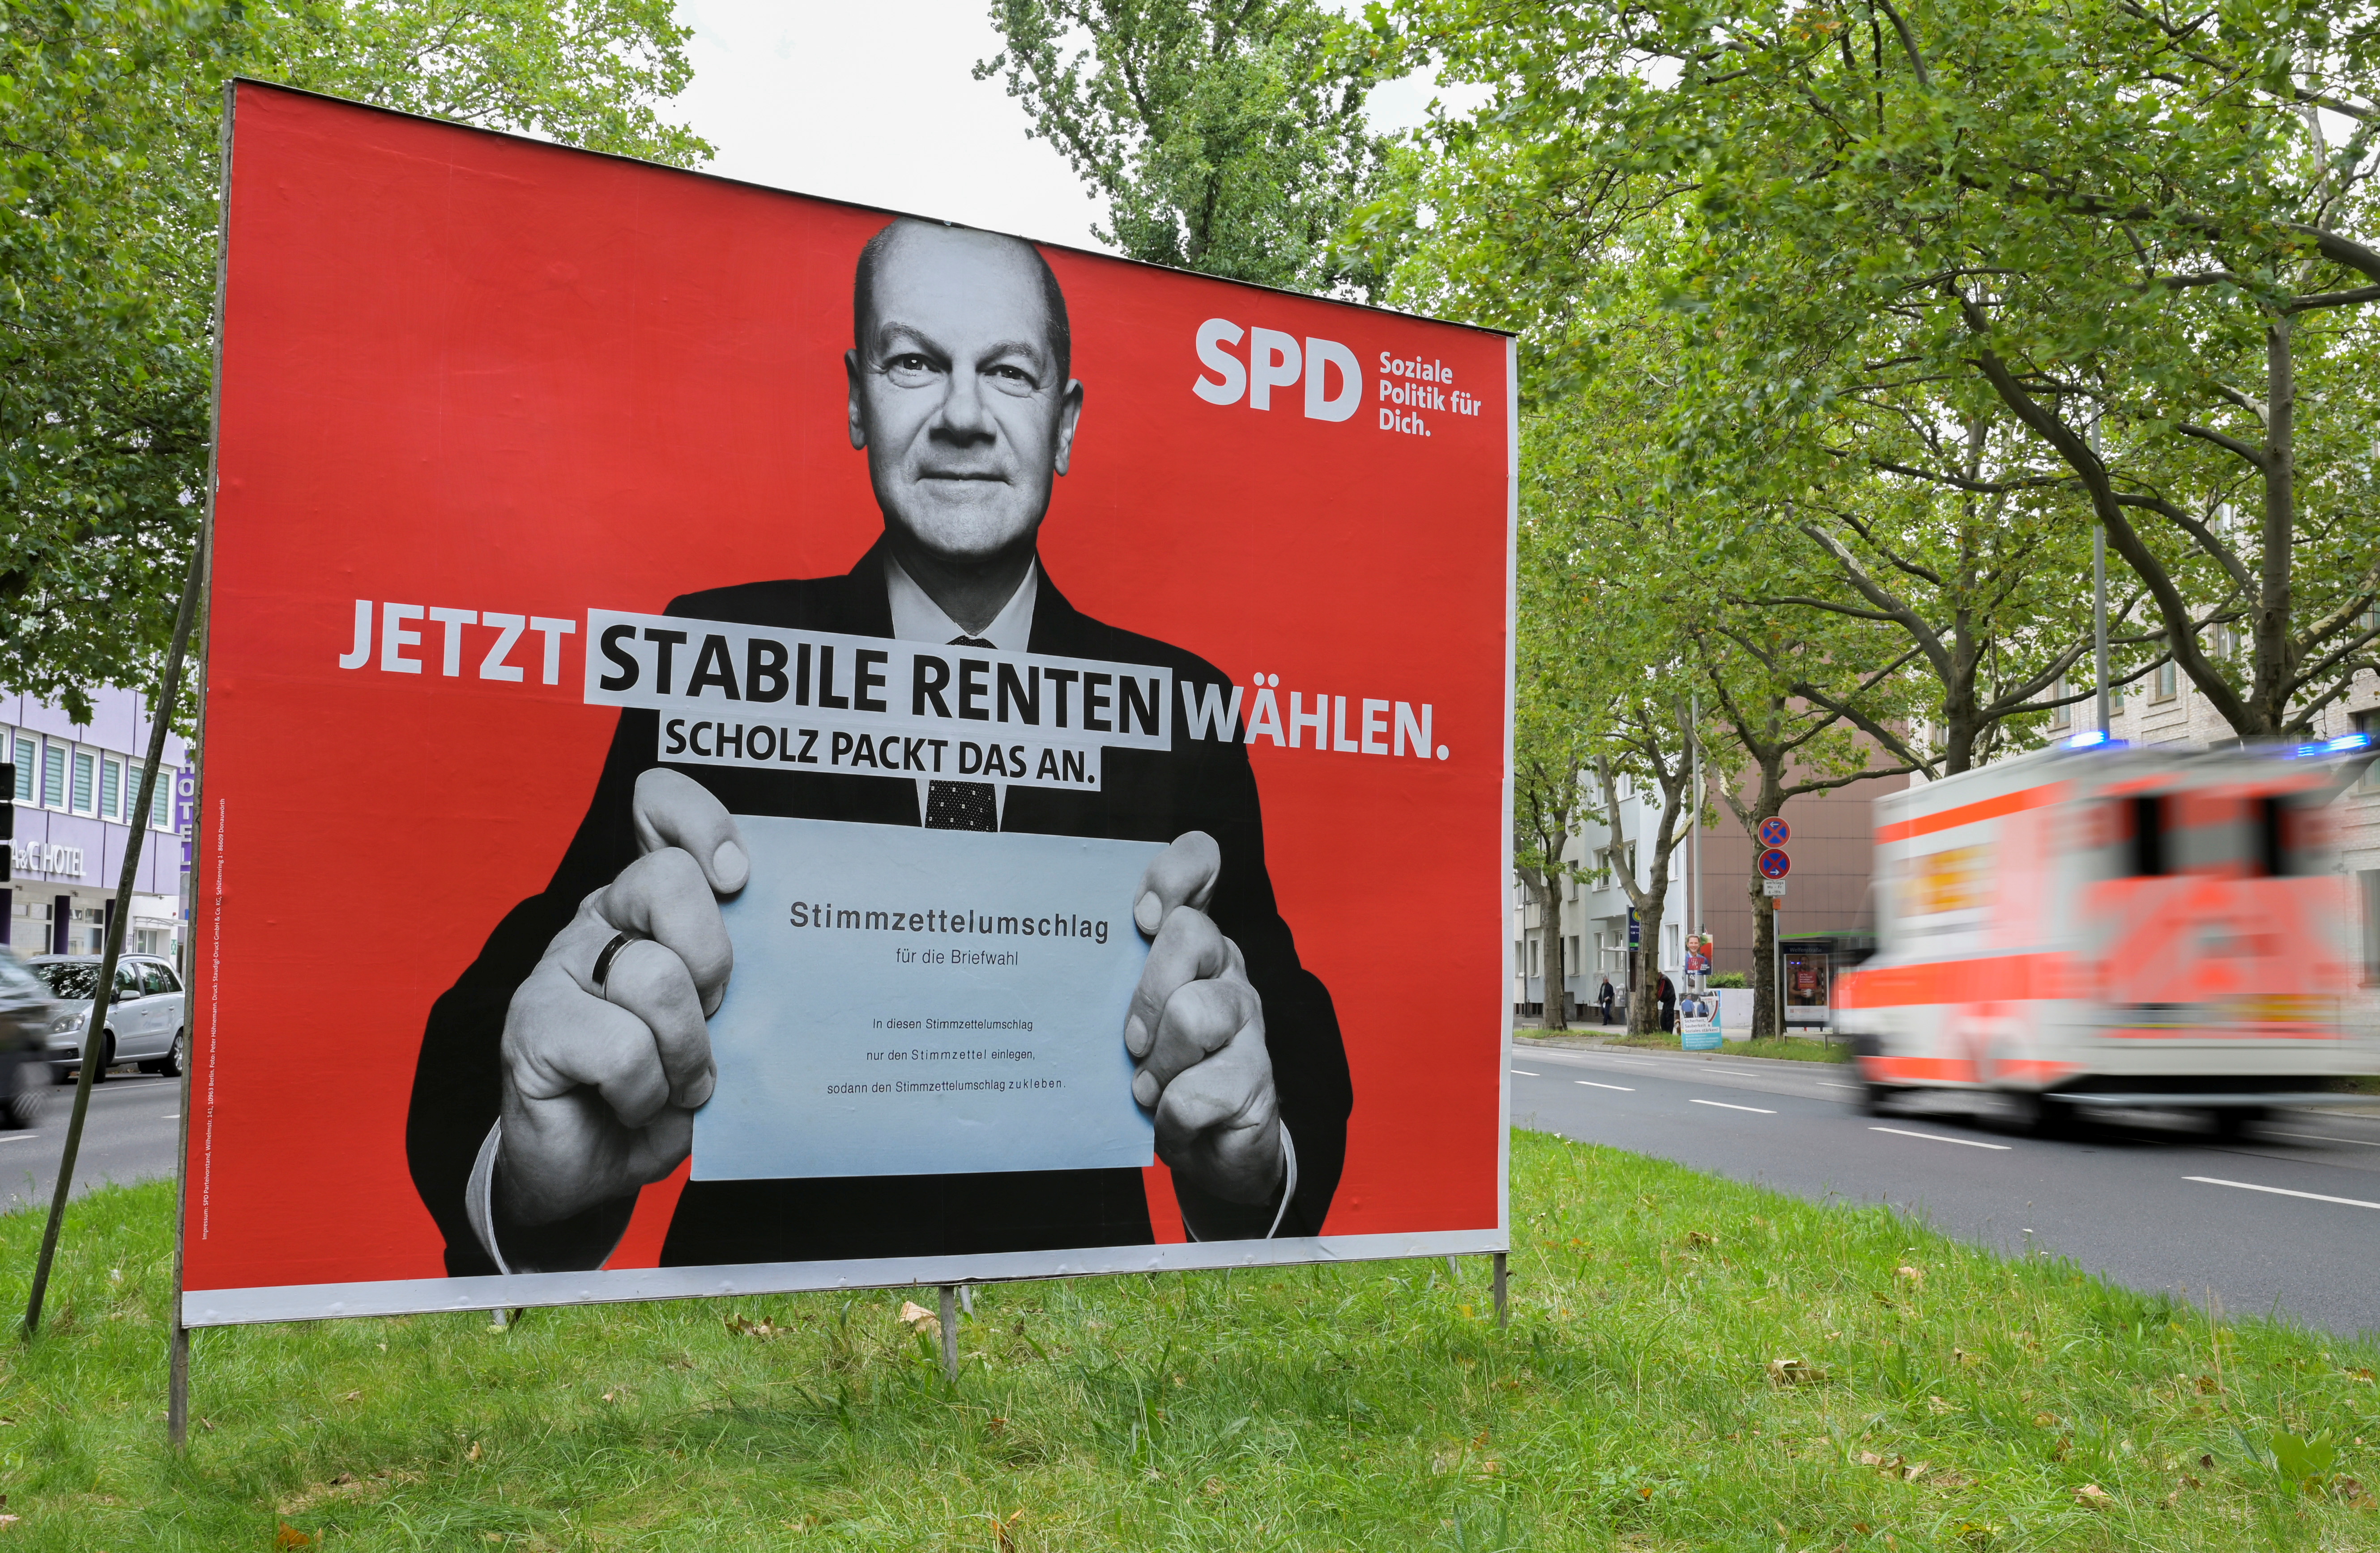 A car passes near an election poster showing Olaf Scholz, German Minister of Finance and top candidate of the The Social Democratic Party of Germany (SPD), who holds a letter for postal voting in Hanover, Germany August 17, 2021. REUTERS/Fabian Bimmer